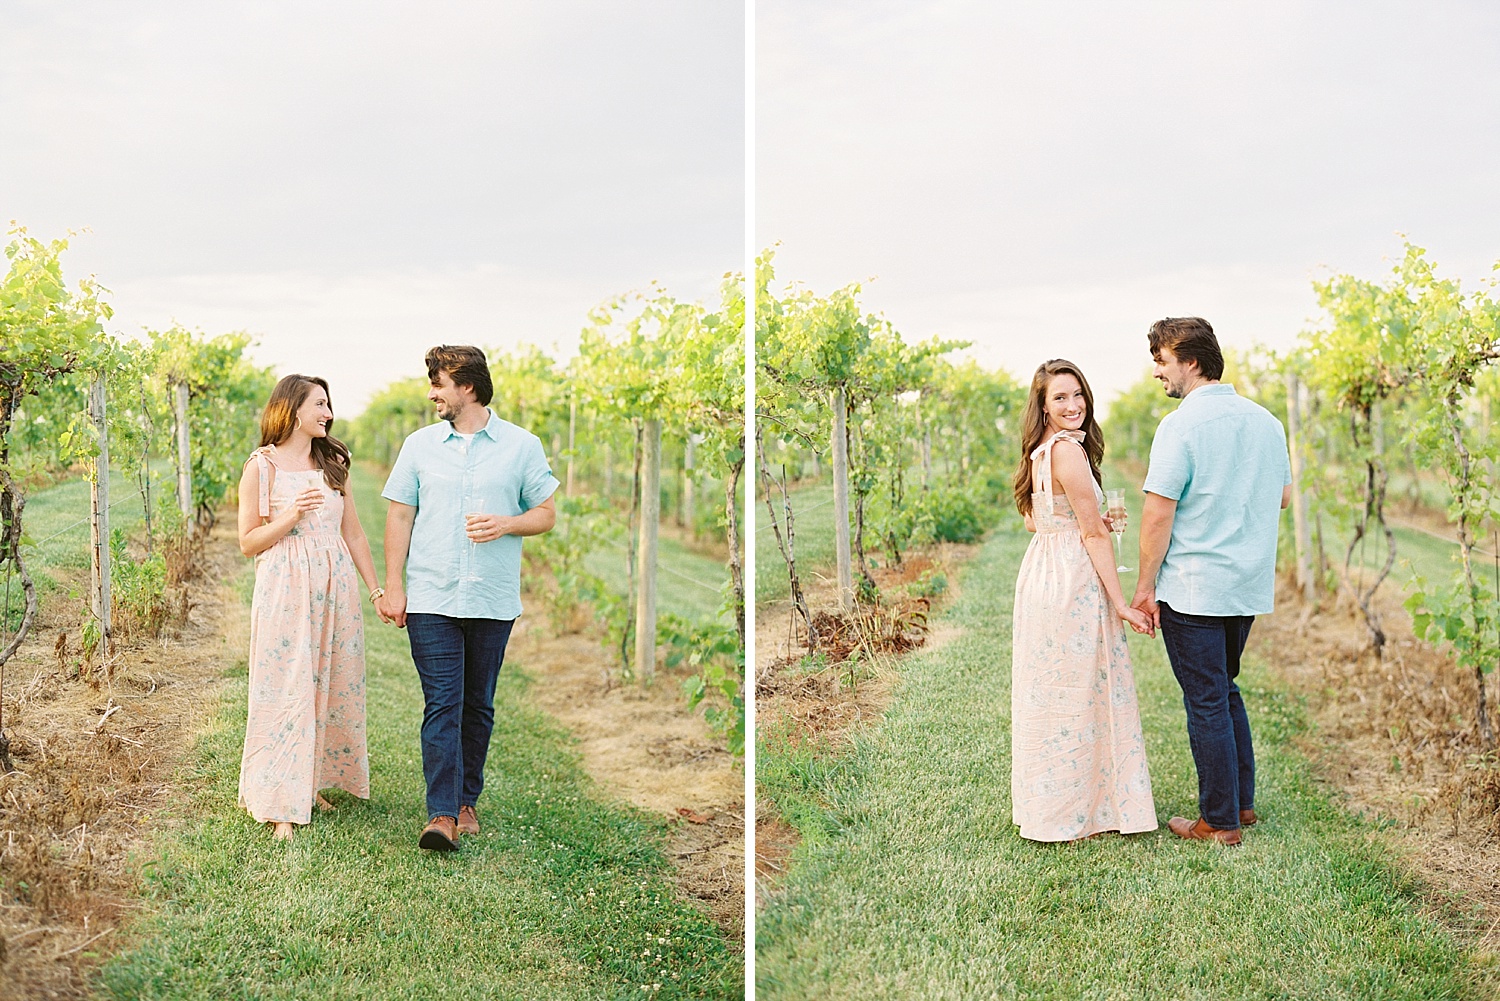 Downtown Lexington Engagement Session Talon Winery Picnic Engagement Session Gal Meets Glam Anthropologie Dress Laura Bodnar Photography Lexington Wedding Photographer Film Photography_0016-1.jpg